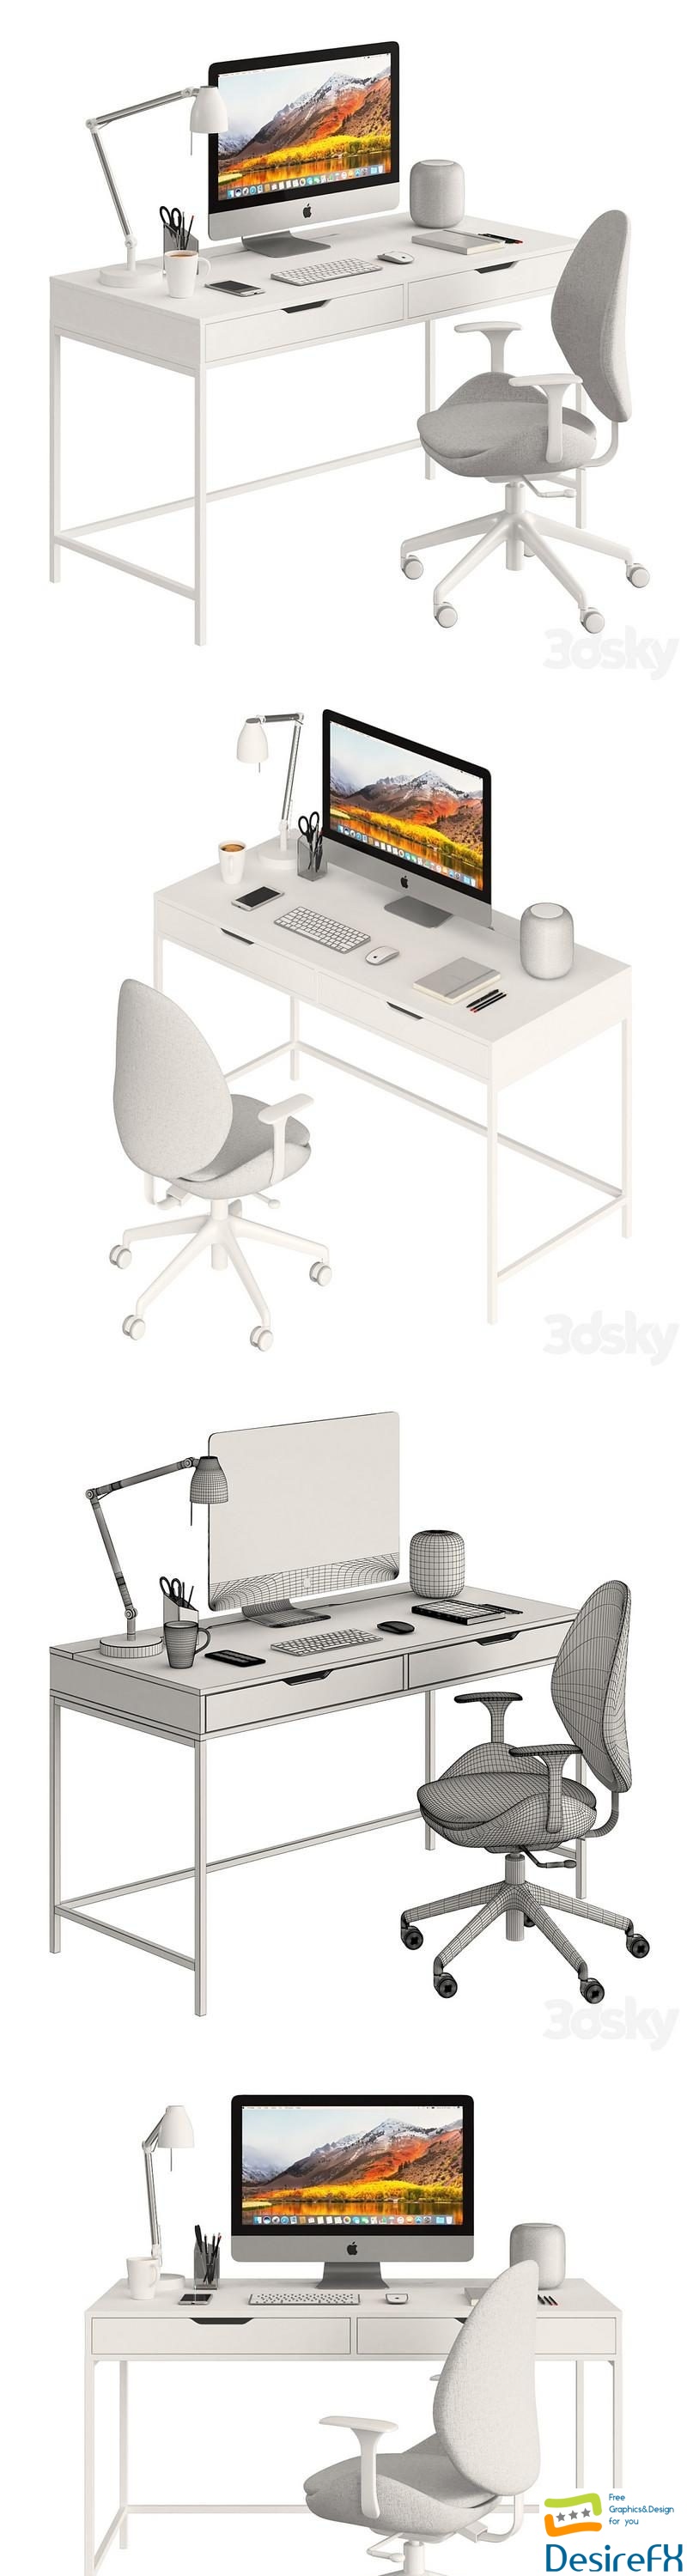 Ikea ALEX table and HATTEFJALL 3D Model